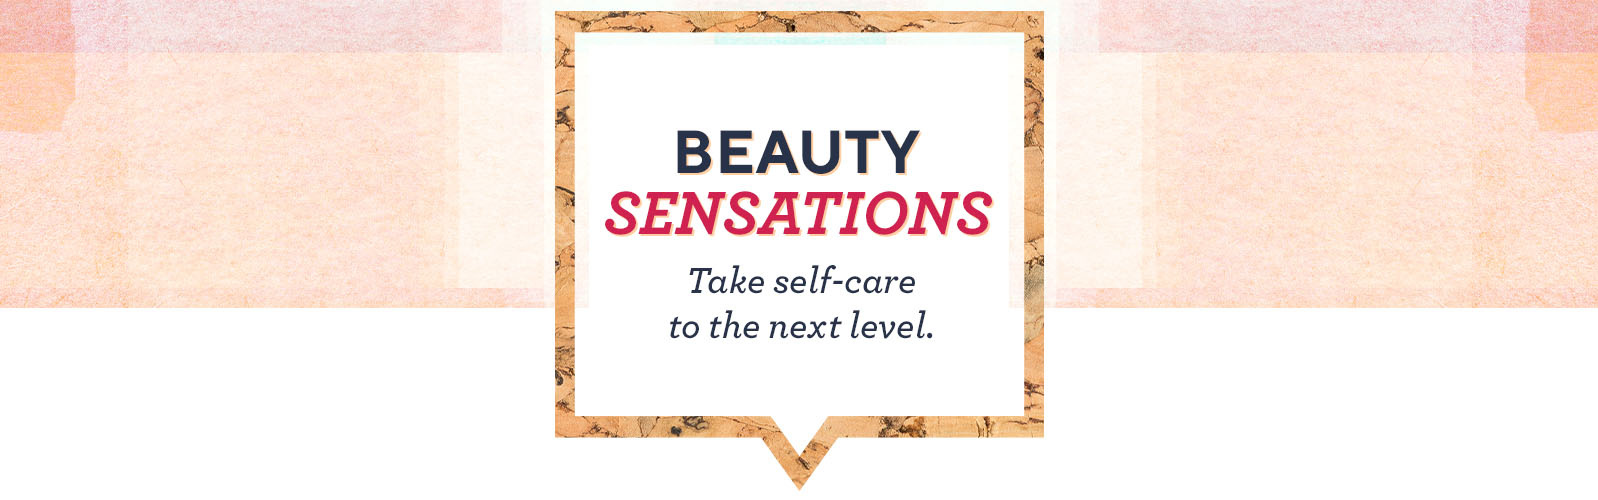 Beauty Sensations - Take self-care to the next level.